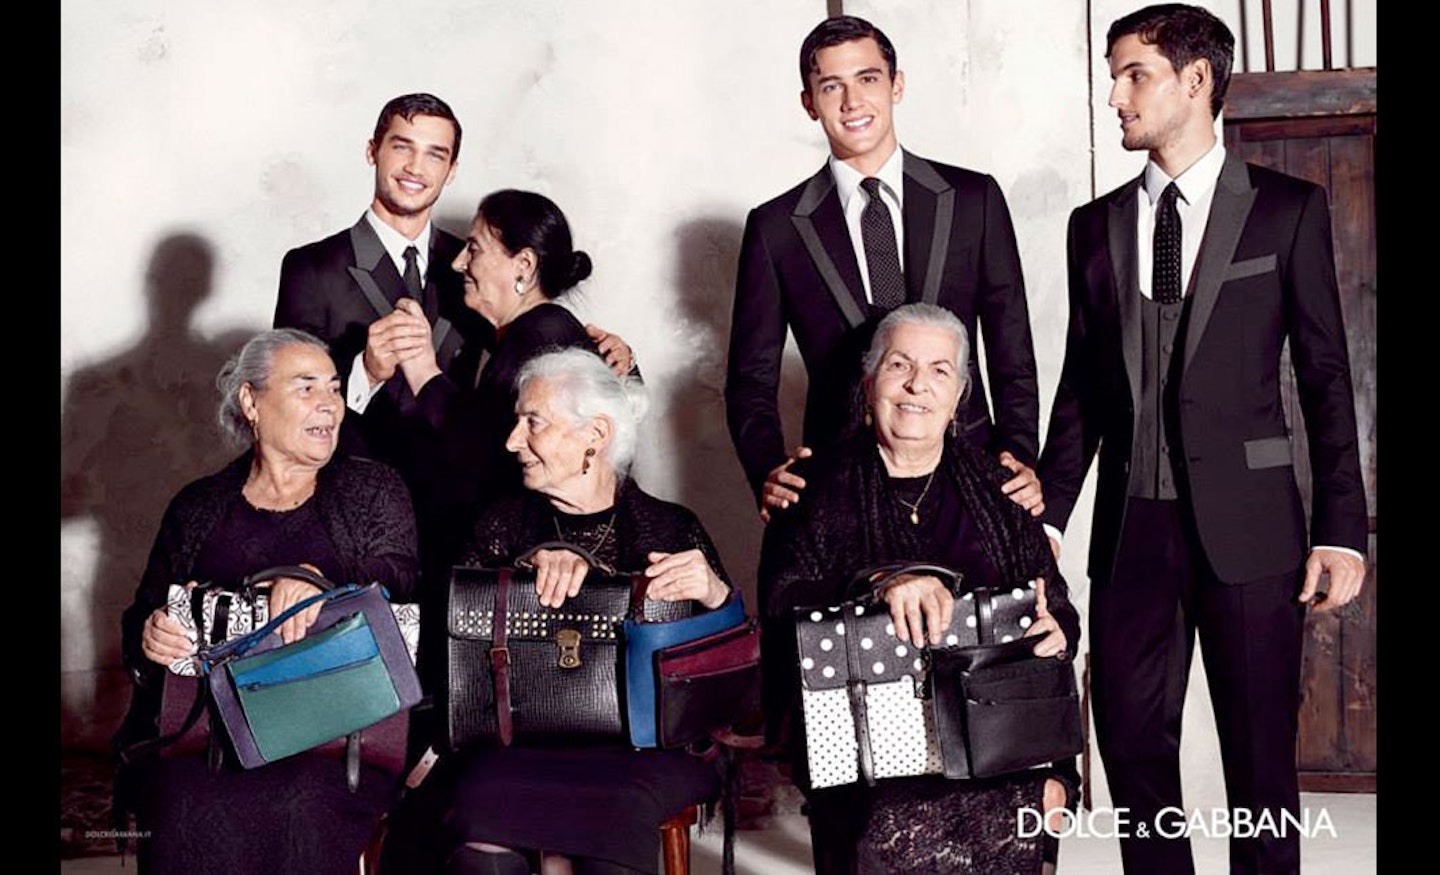 Dolce and Gabbana's nanas are nothing but chic